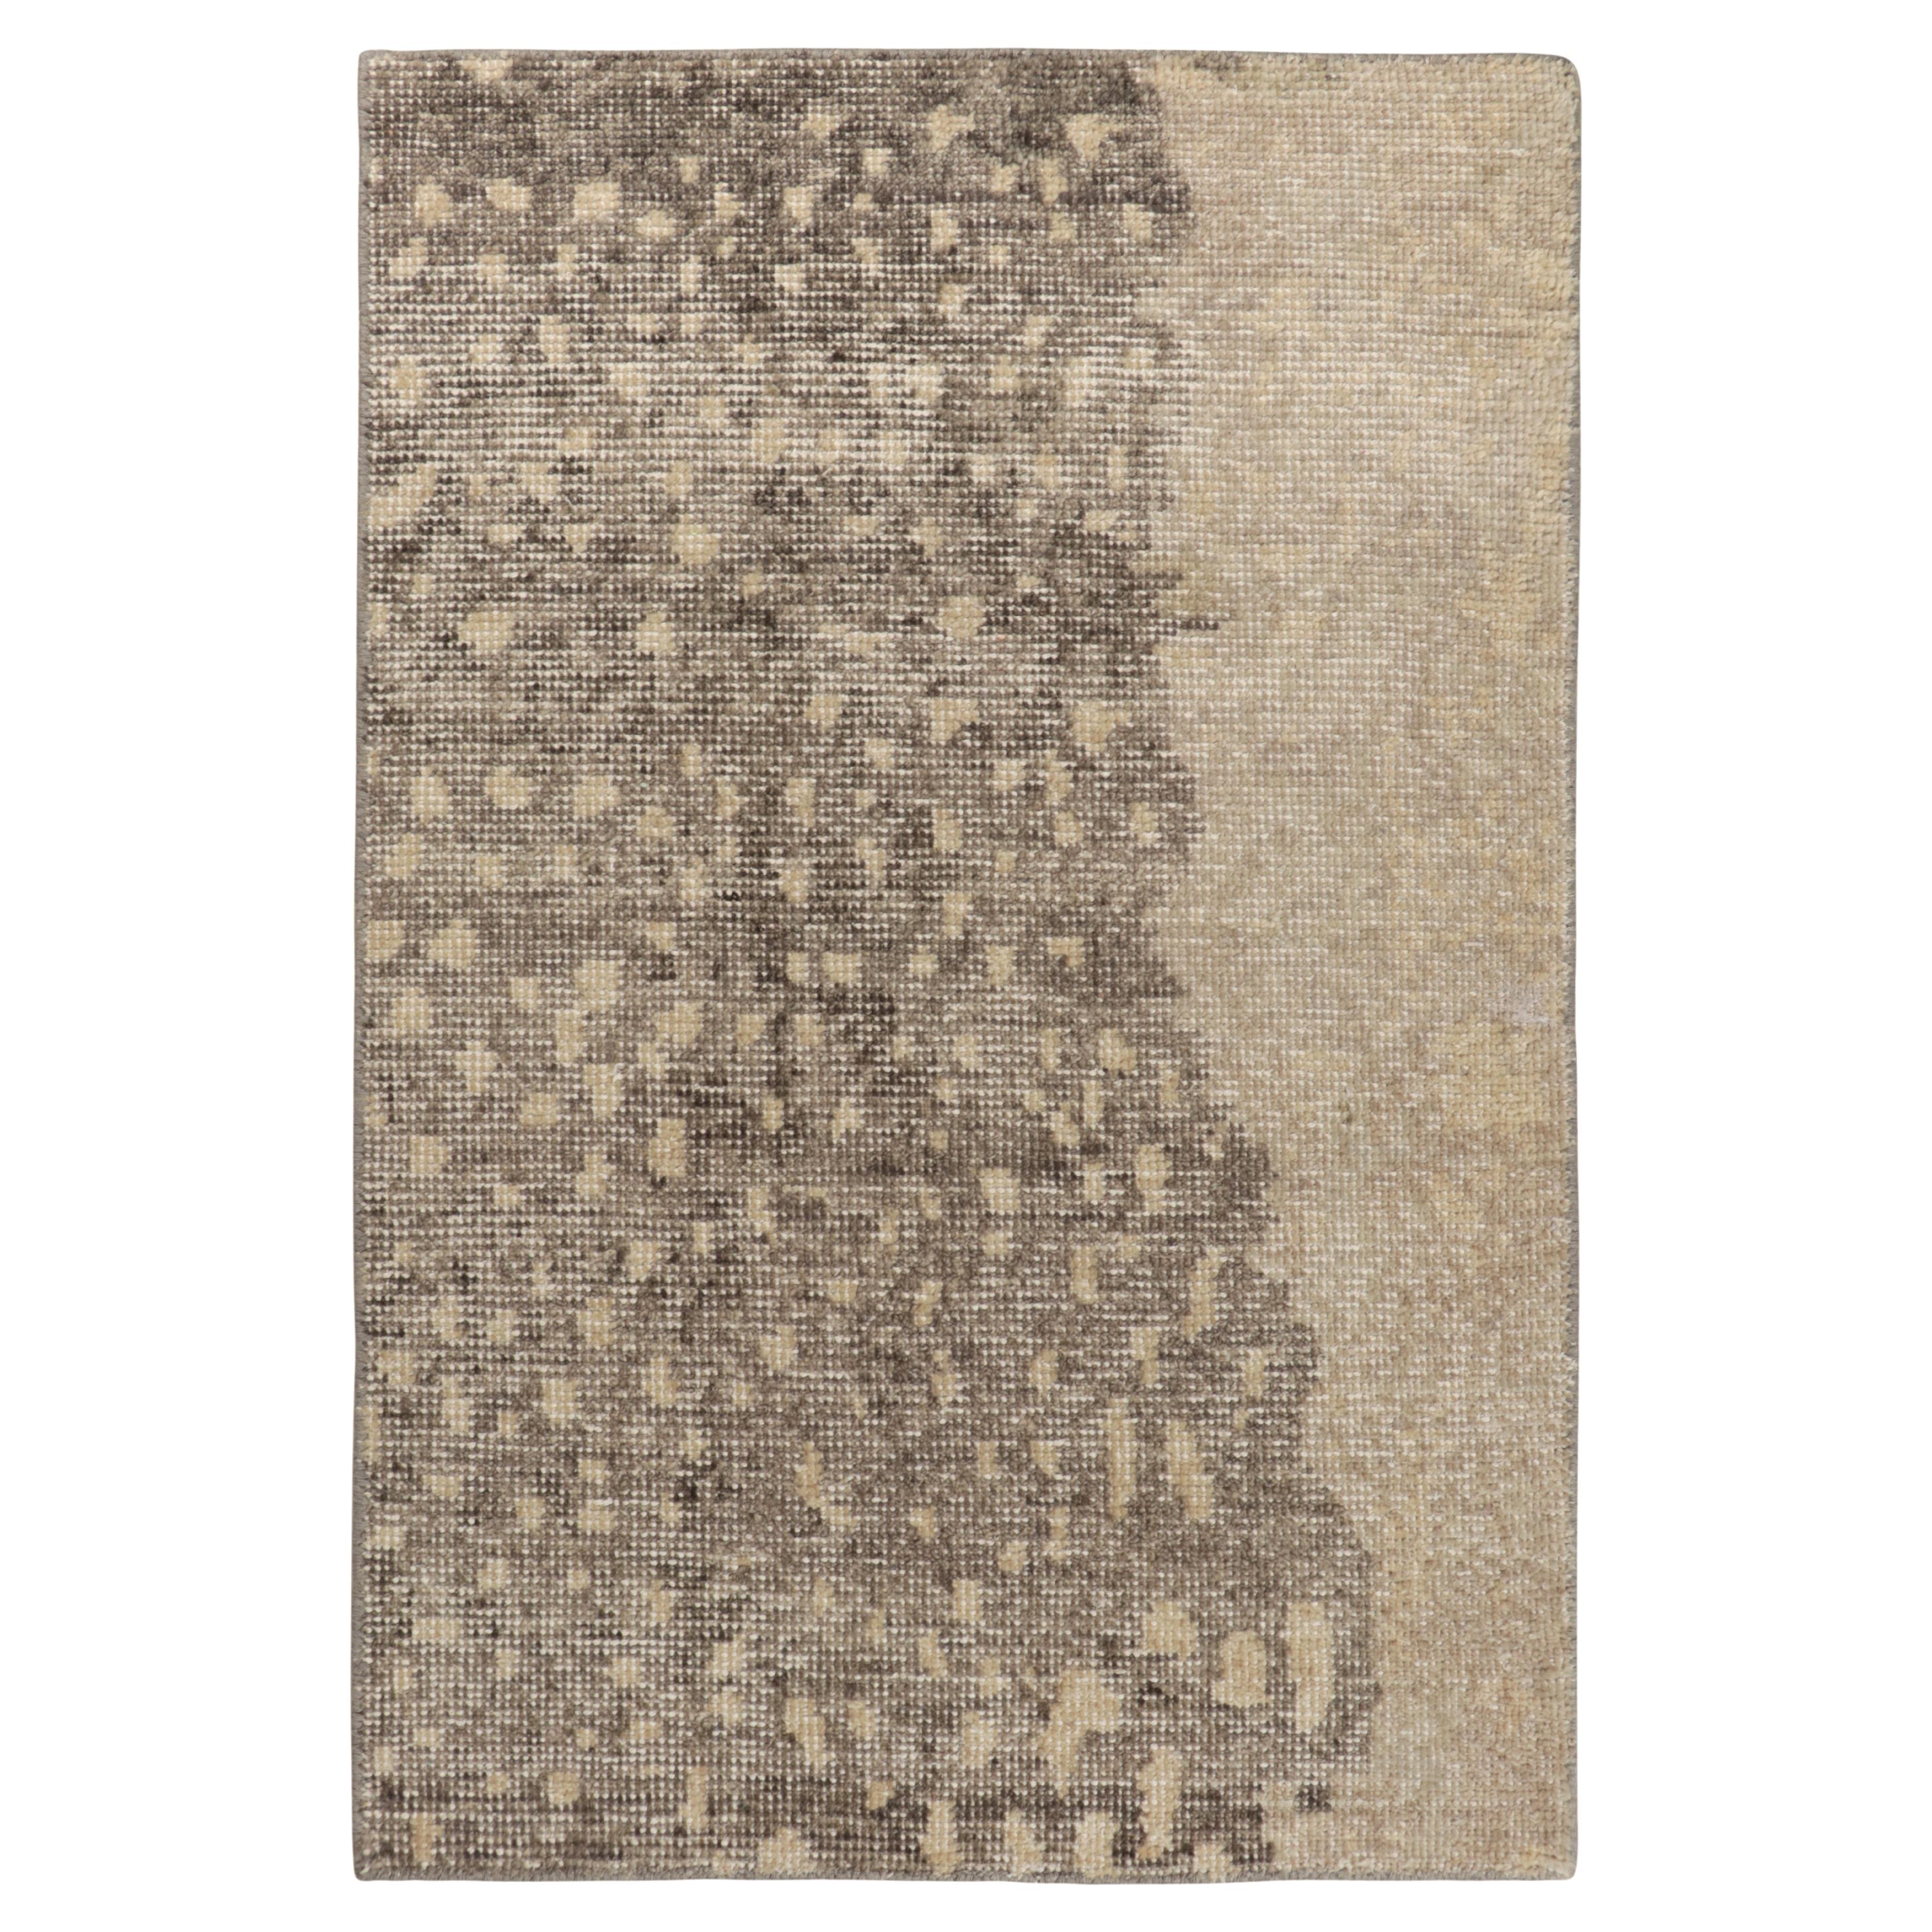 Rug & Kilim’s Distressed Style Gift-Size Rug in Beige-Brown Patterns